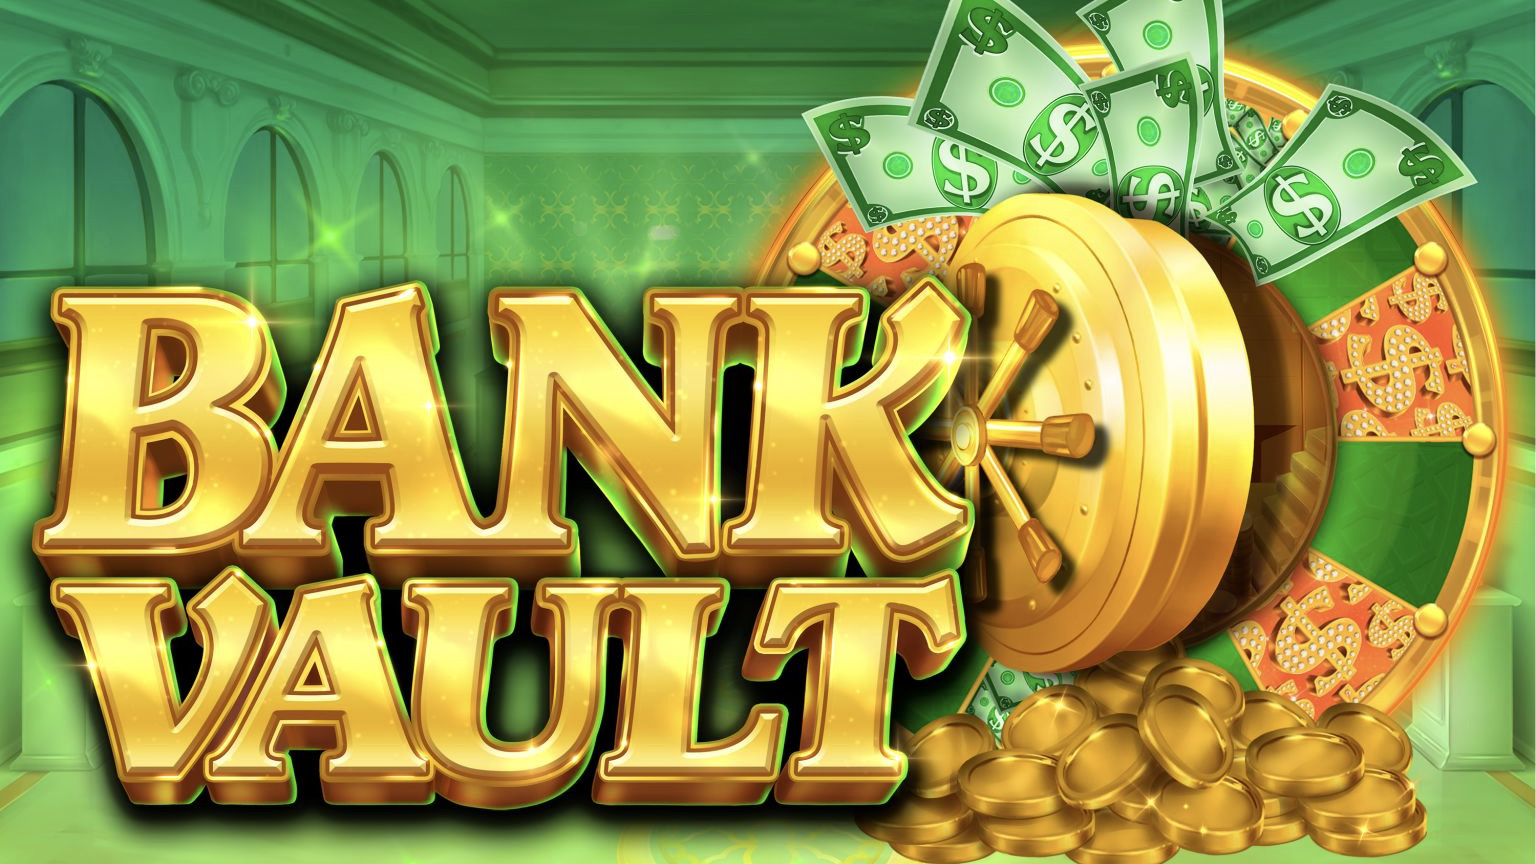 Bank Vault is a 5x3, 25-payline video slot that incorporates a maximum win potential of up to x10,000 the bet.